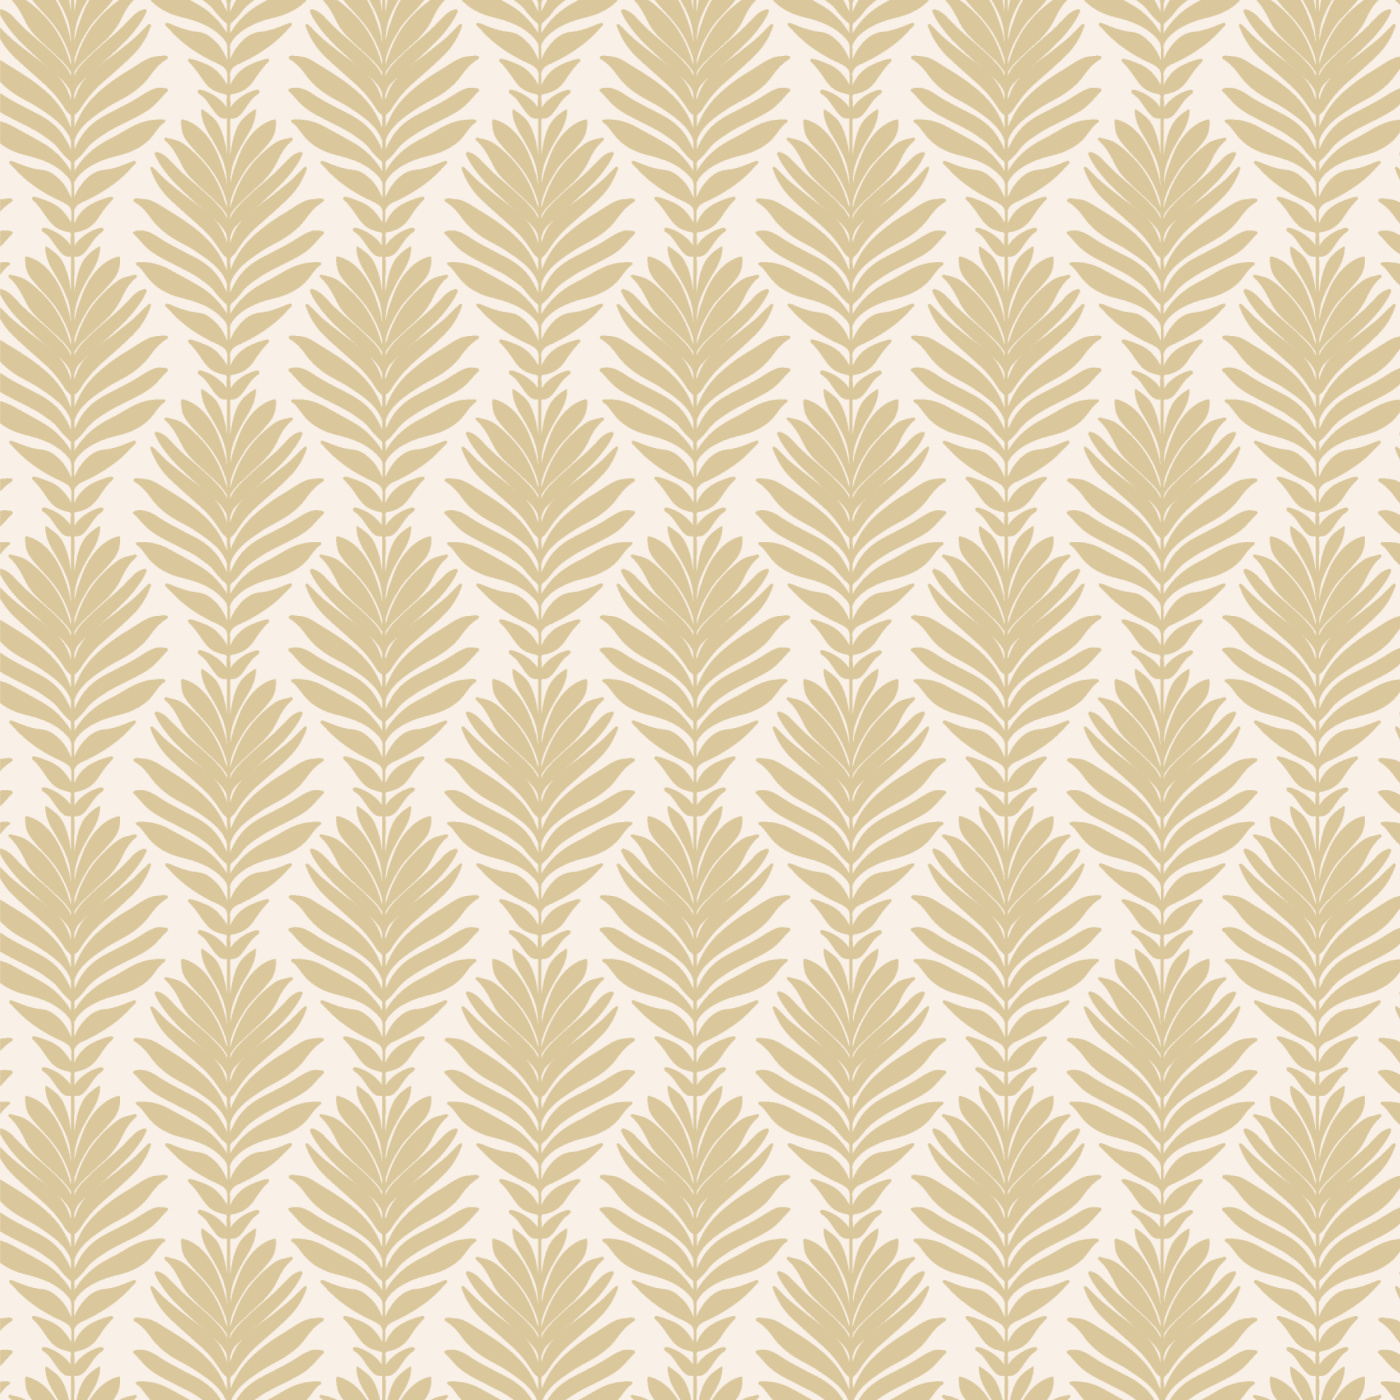 Feathered Leaves Wallpaper